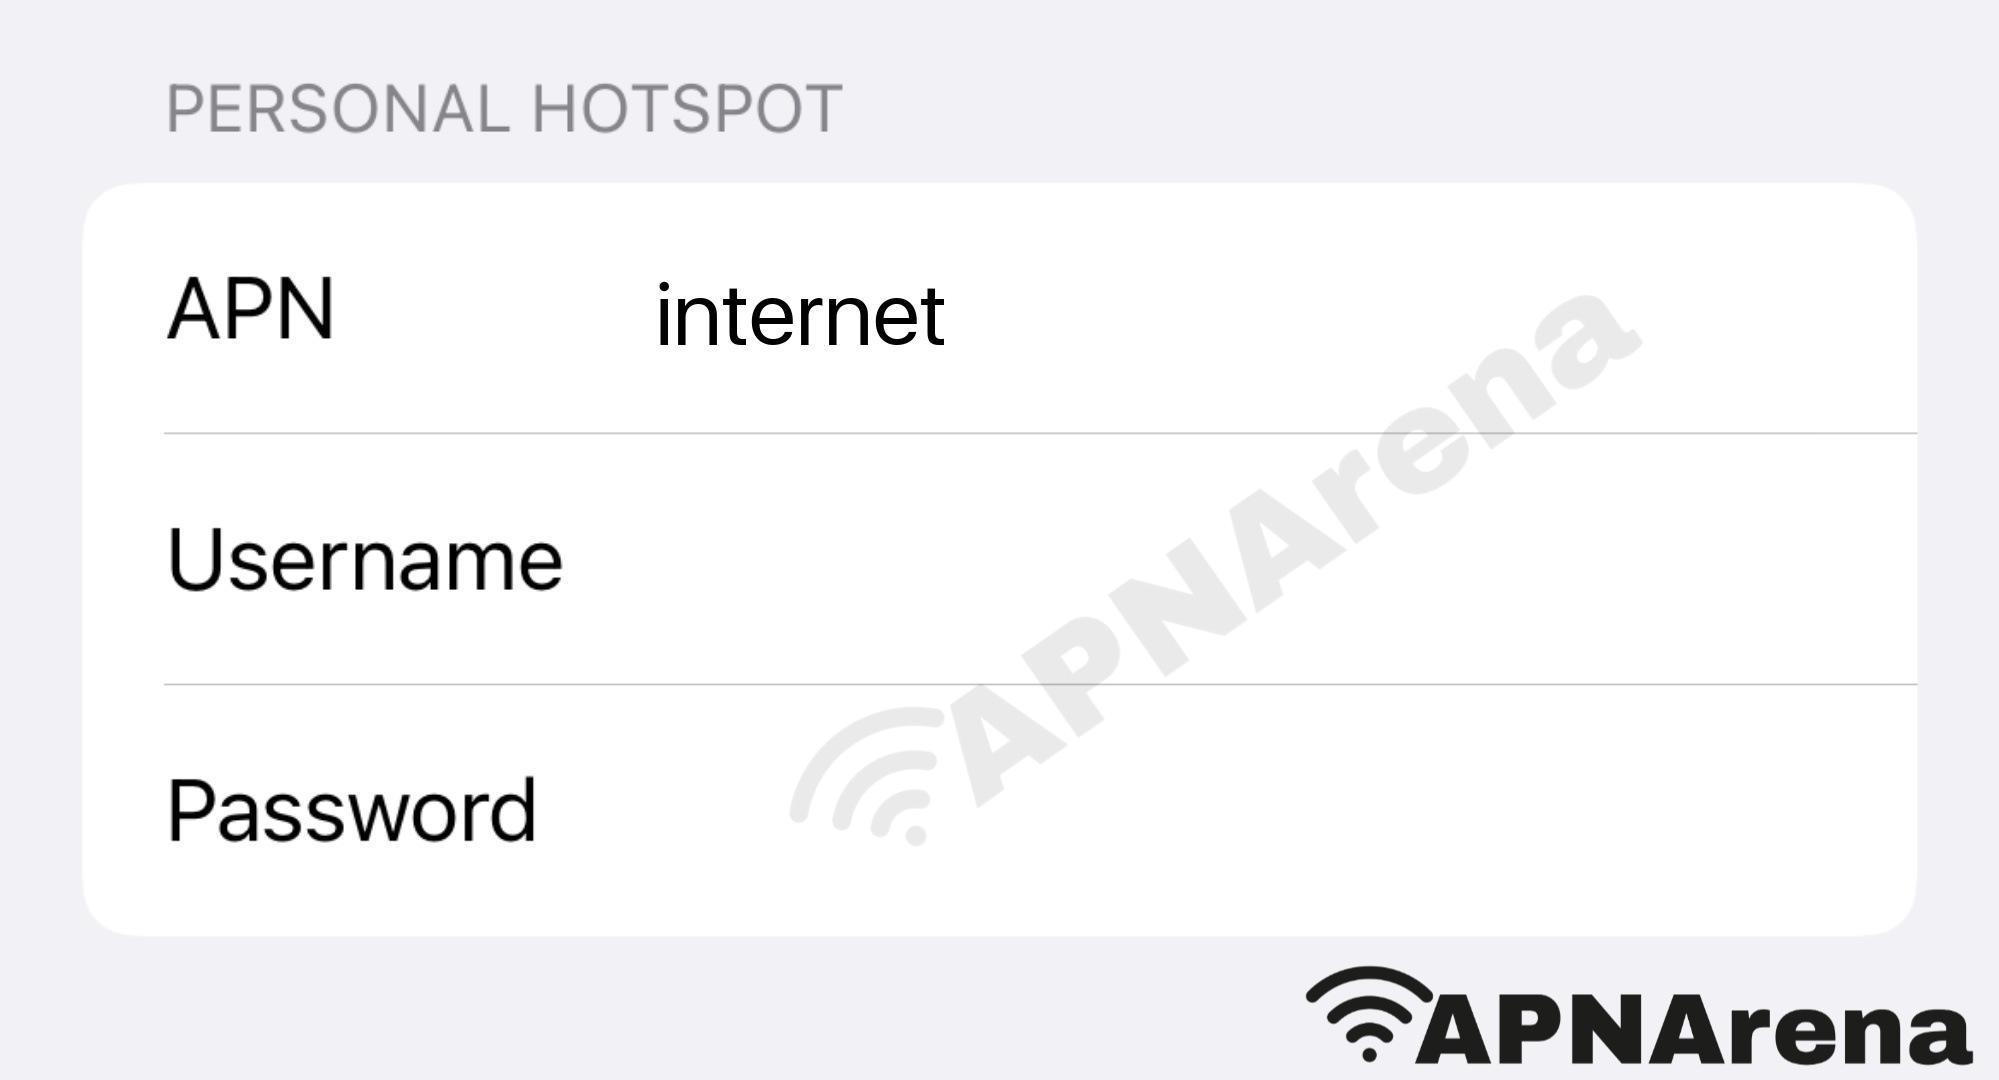 XFONE Personal Hotspot Settings for iPhone